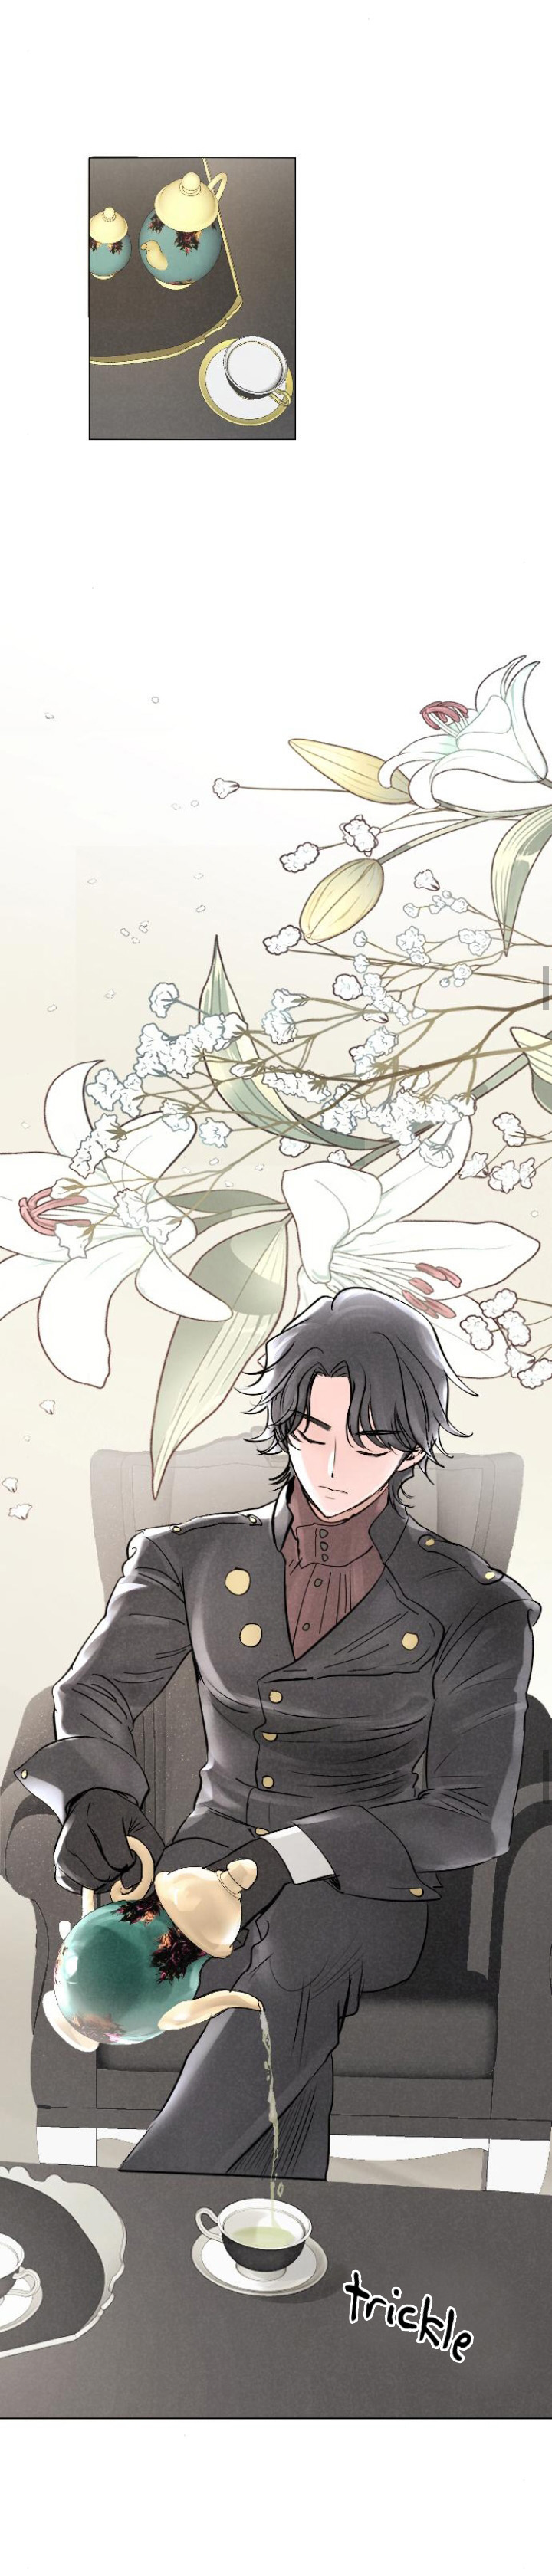 I Picked Up the Second Male Lead After the Ending Ch. 3